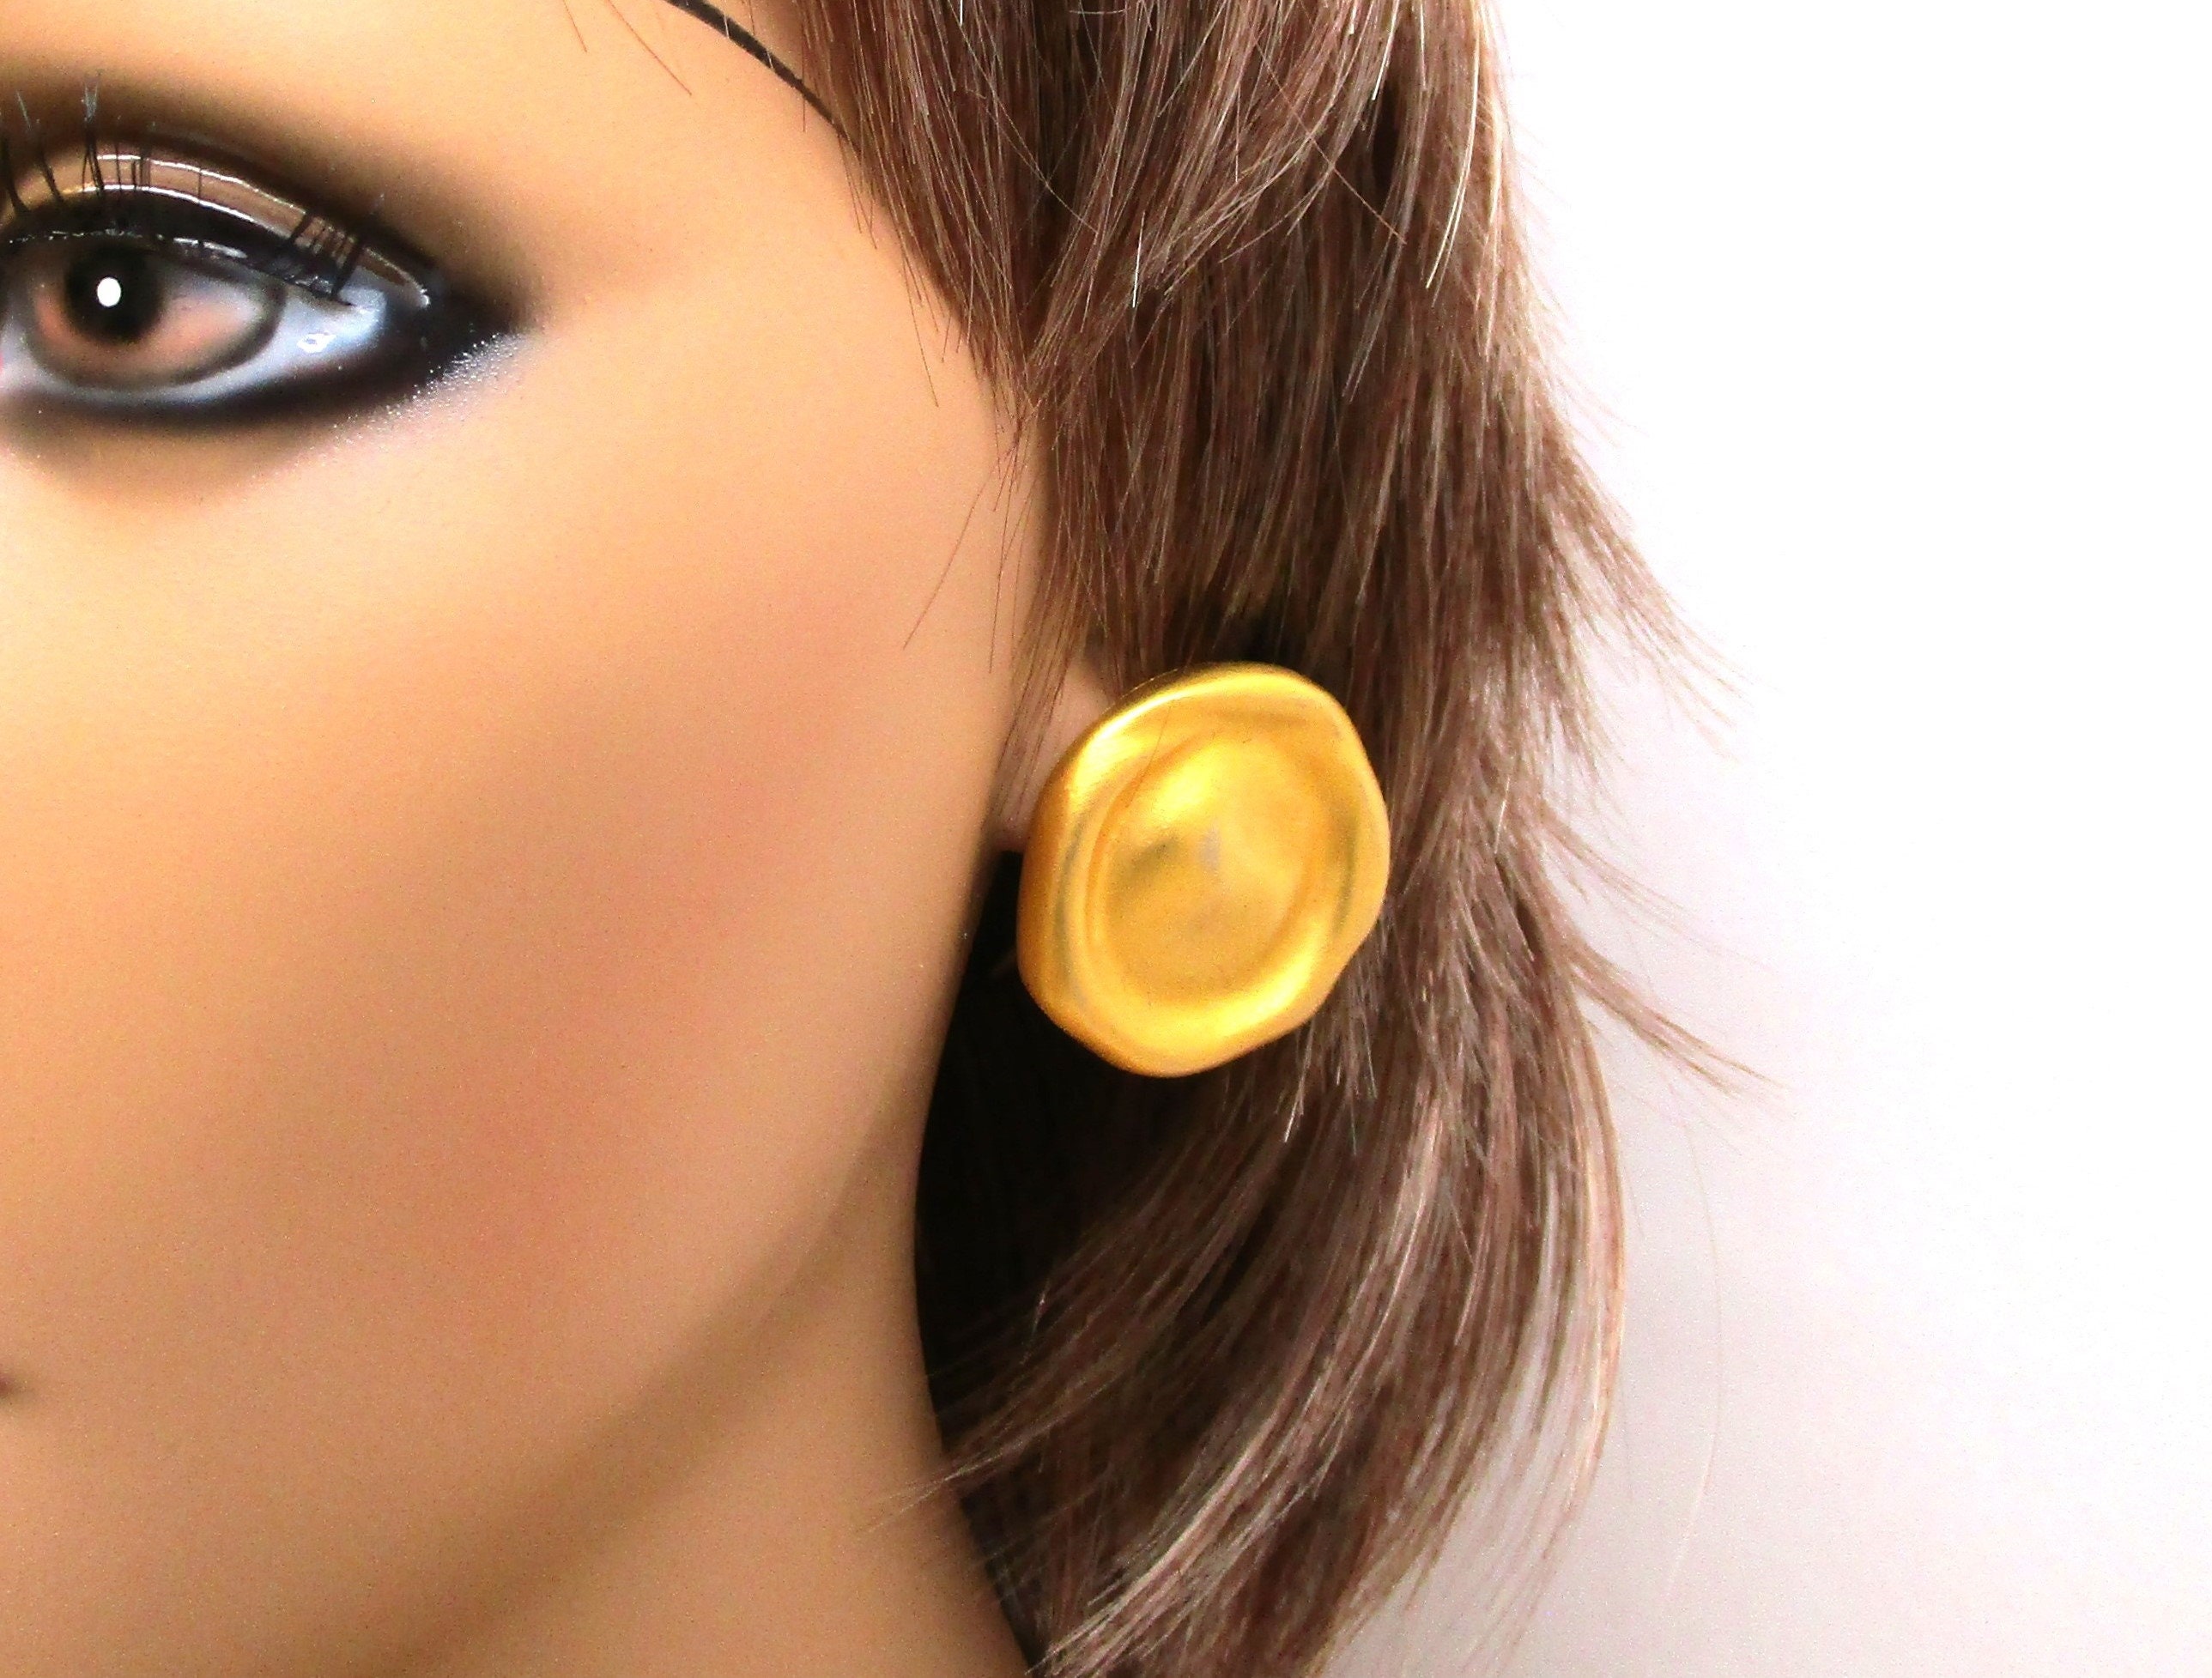 Chanel Logo Coco Spiral Decoration Round Earrings Gold Plate 26 Vintage